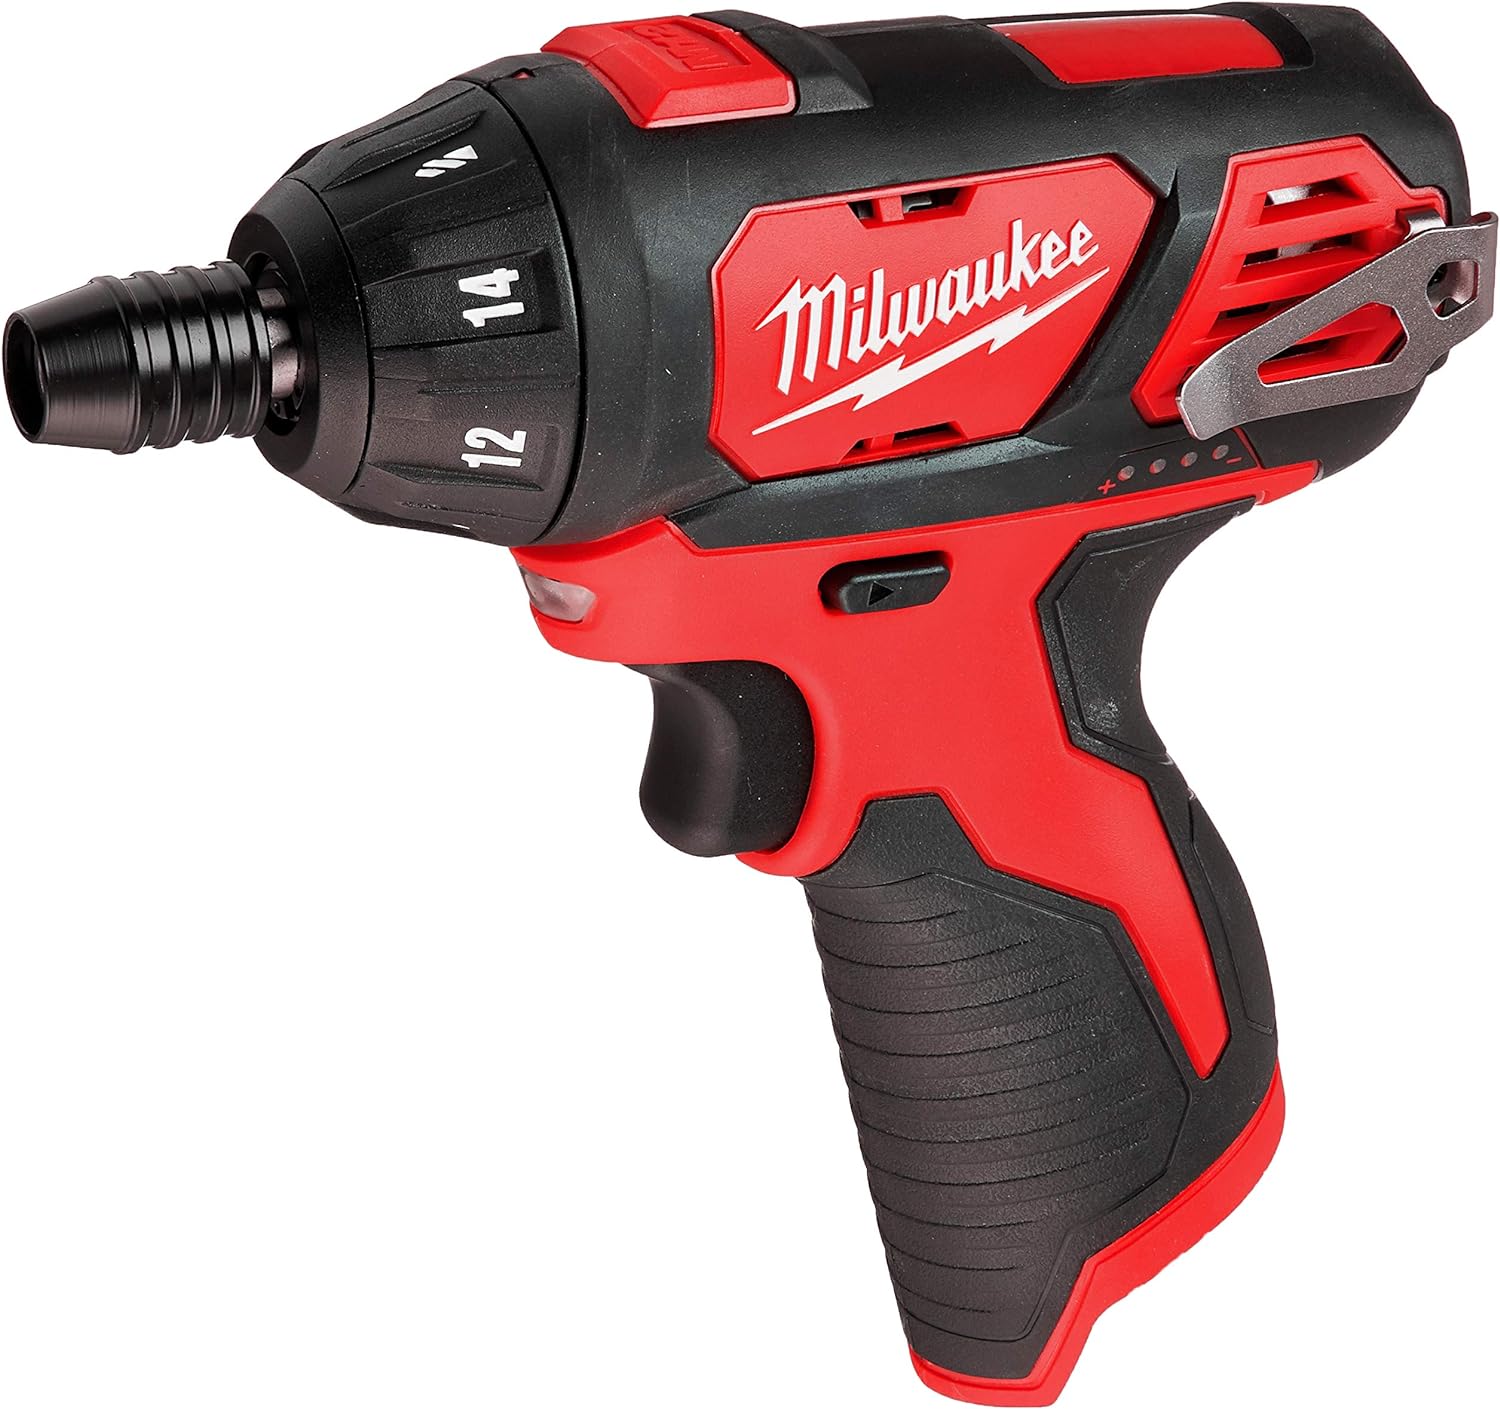 Milwaukee 2401-20 M12 12-Volt Lithium-Ion Cordless 1/4 in. Hex Screwdriver (Tool-Only)